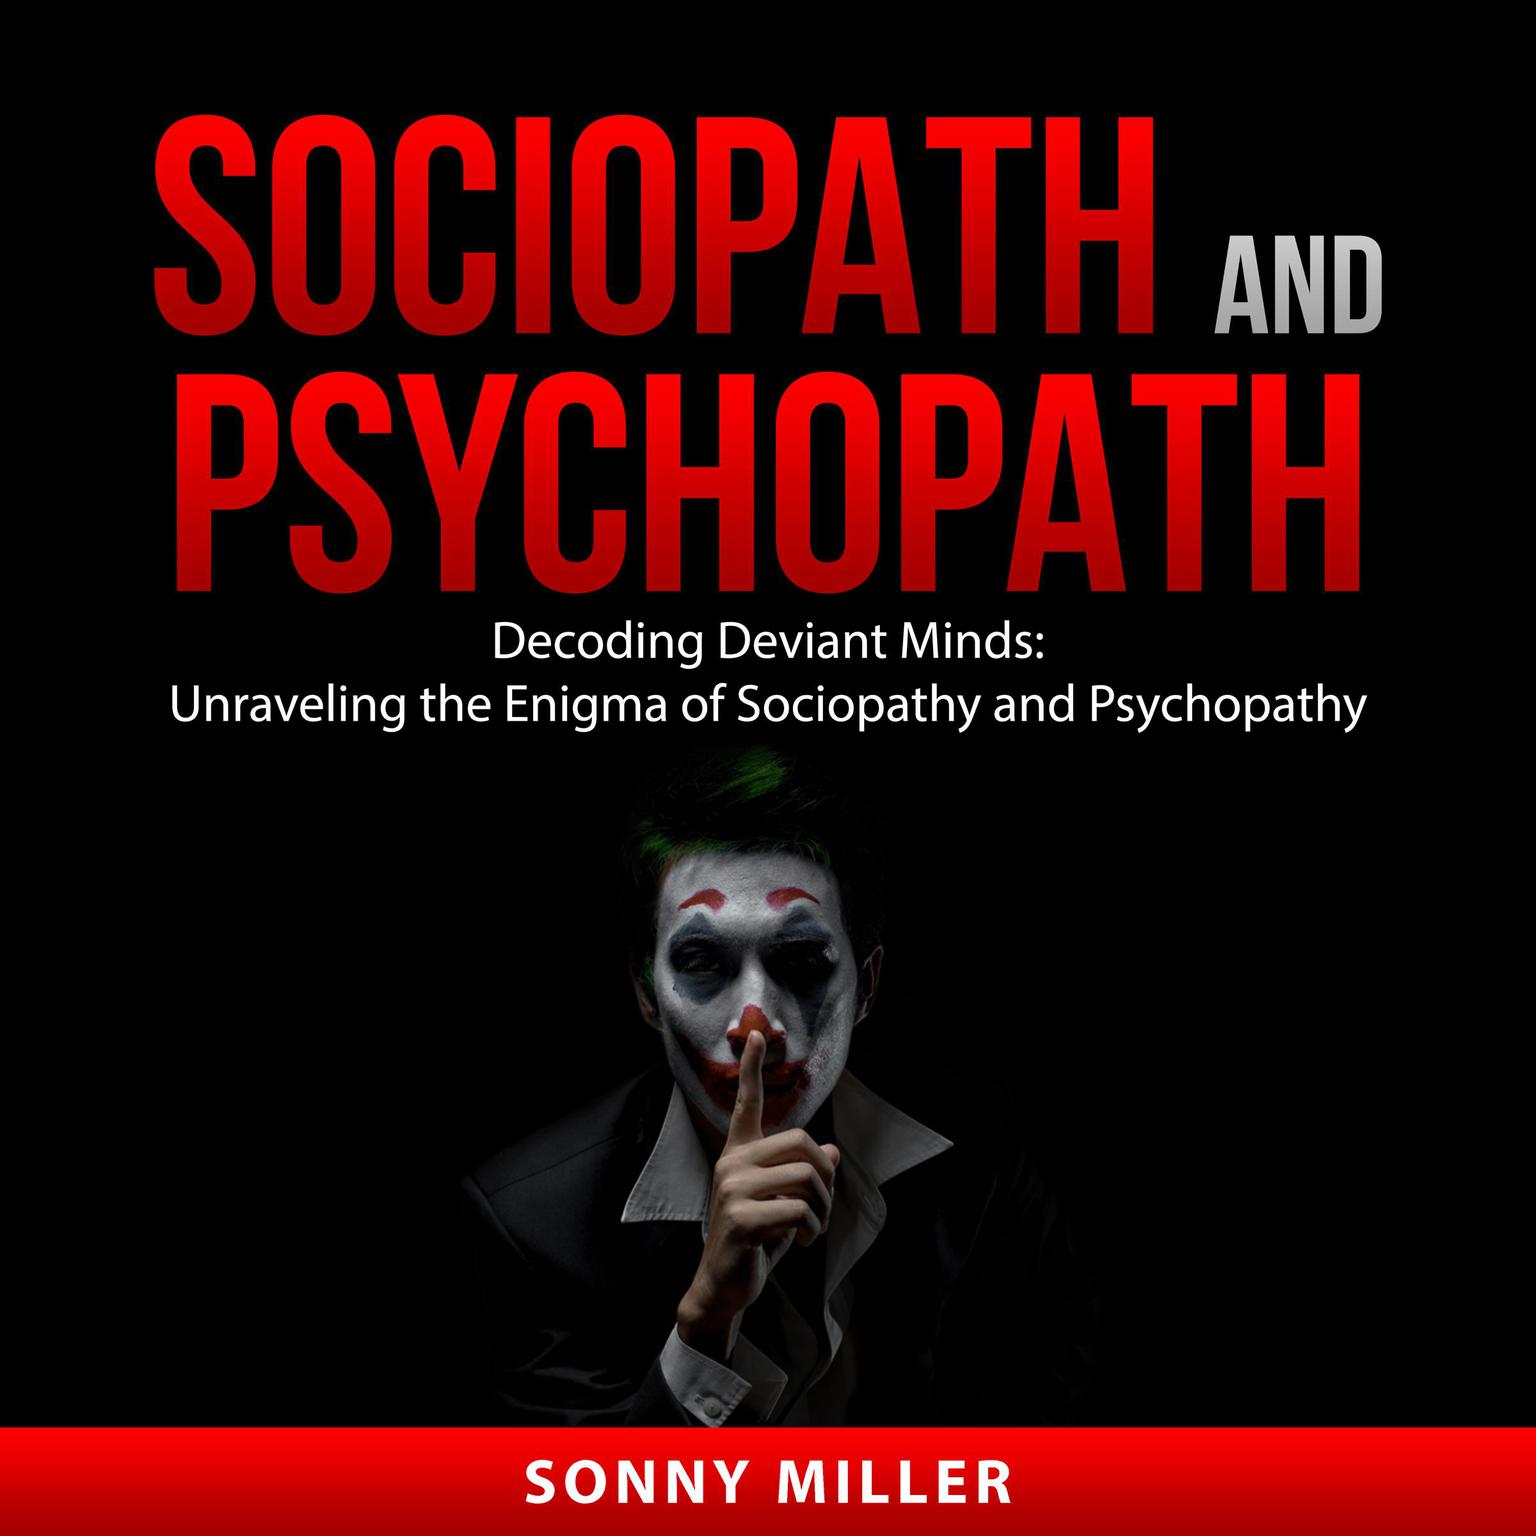 Sociopath and Psychopath Audiobook, by Sonny Miller